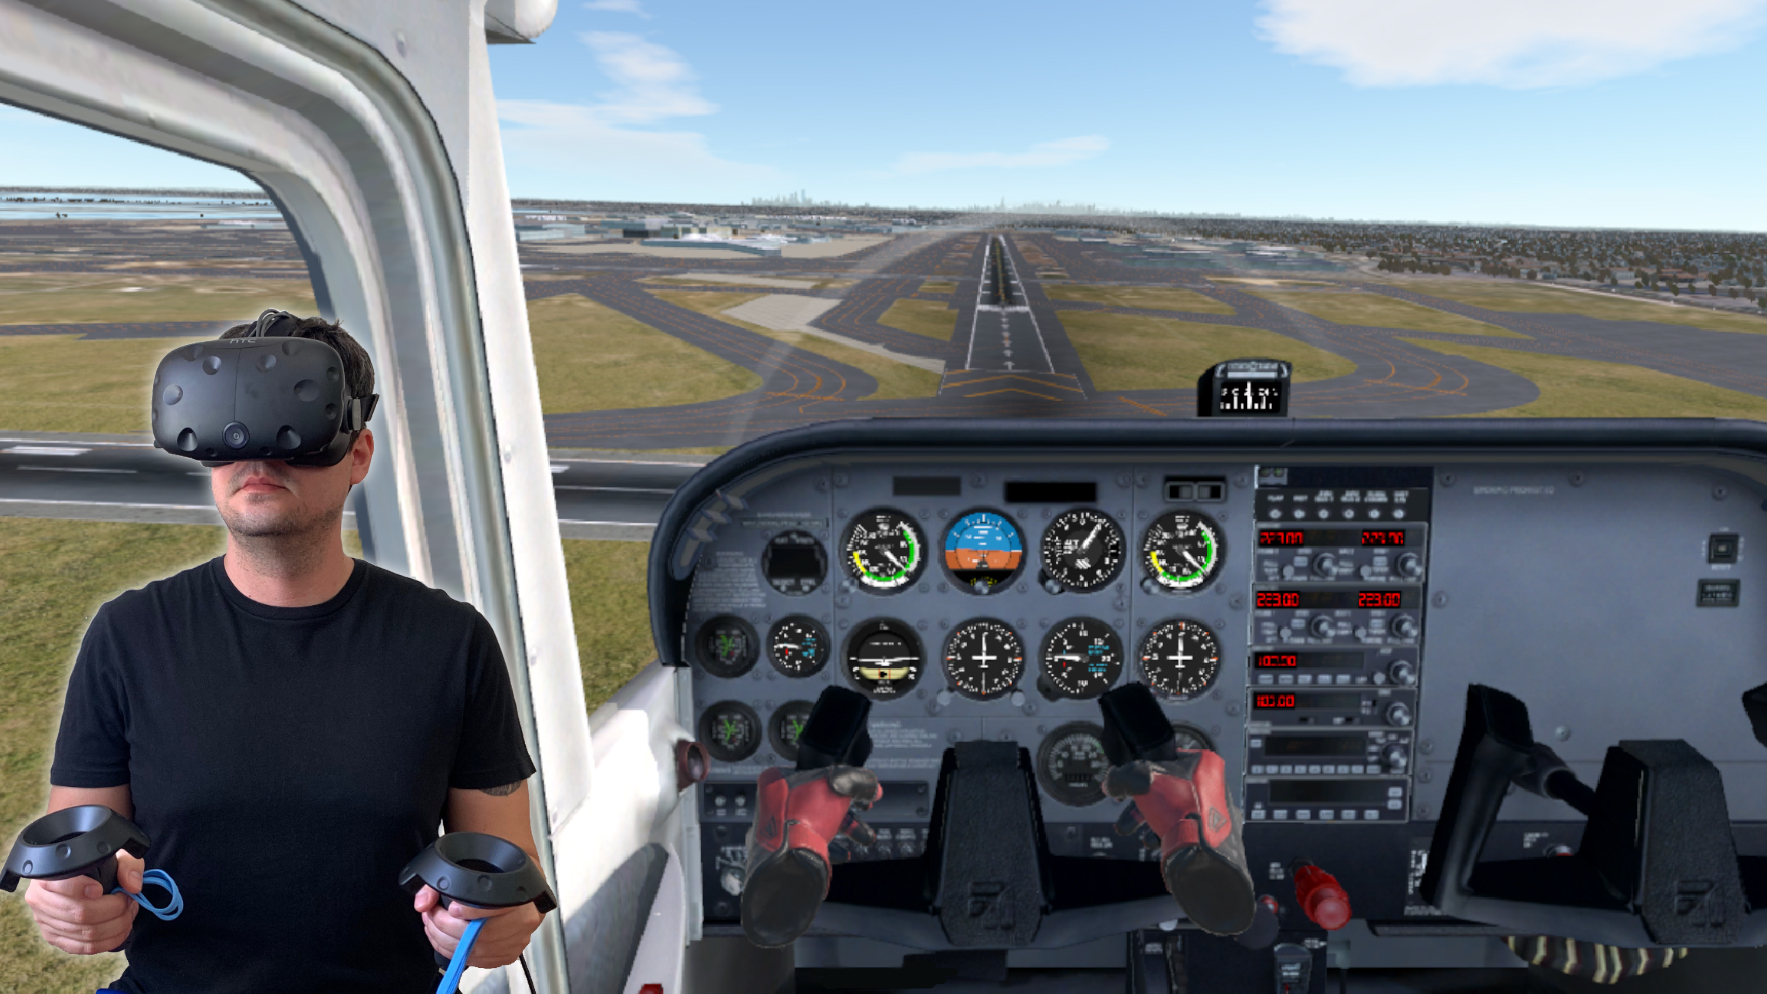 download the new for ios Airplane Flight Pilot Simulator